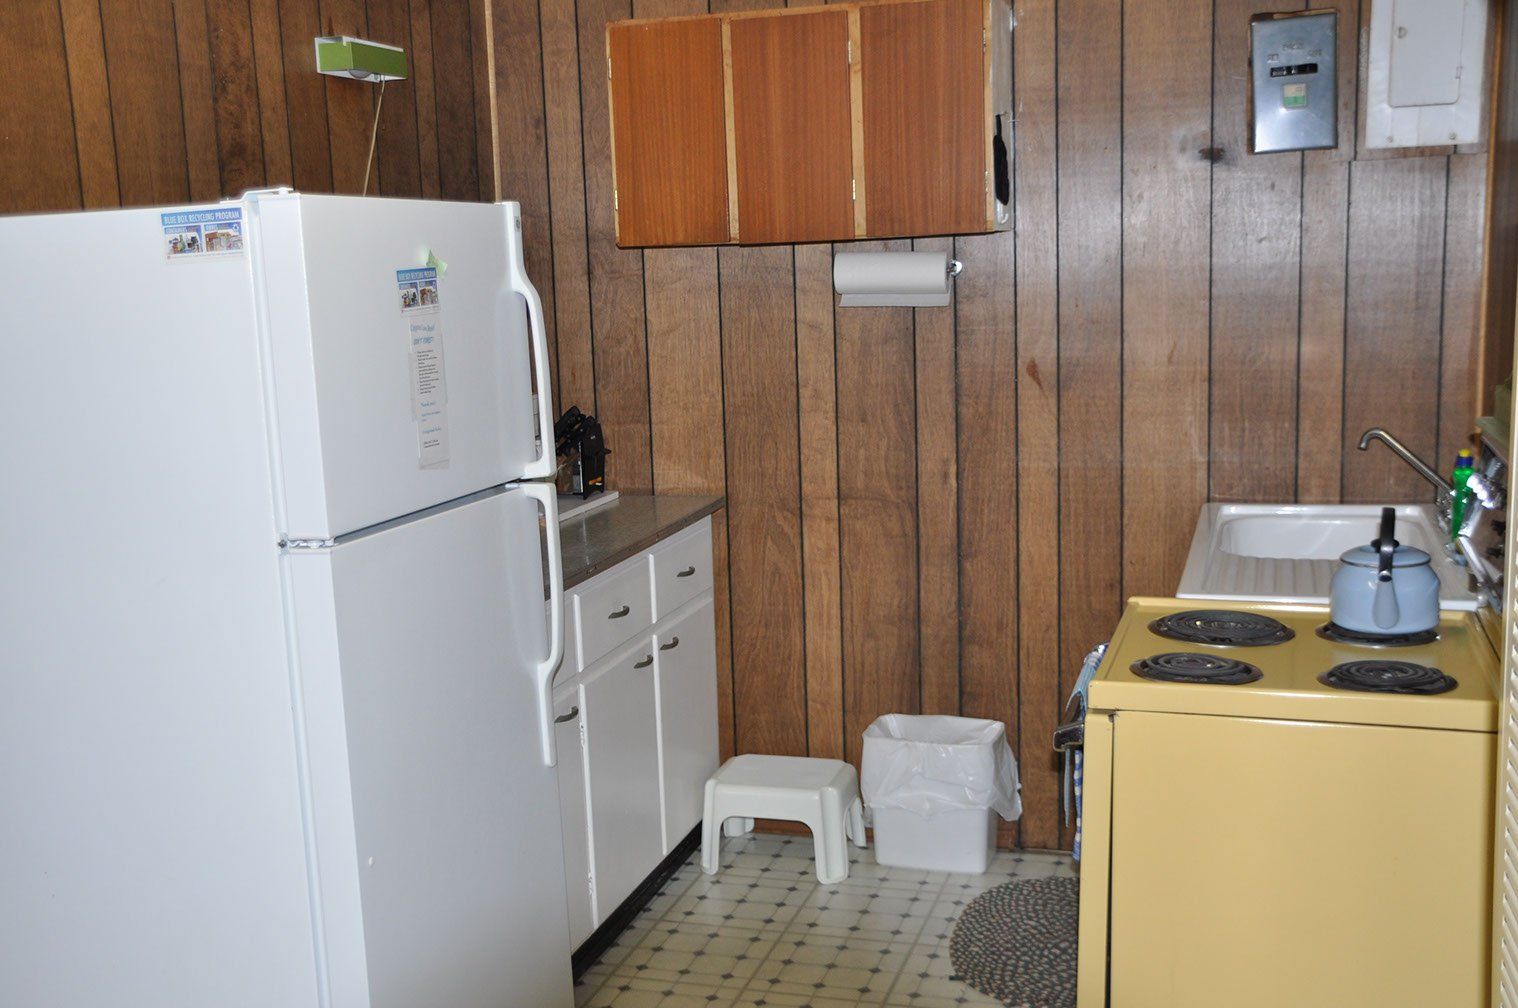 A kitchen with a yellow stove and a white refrigerator